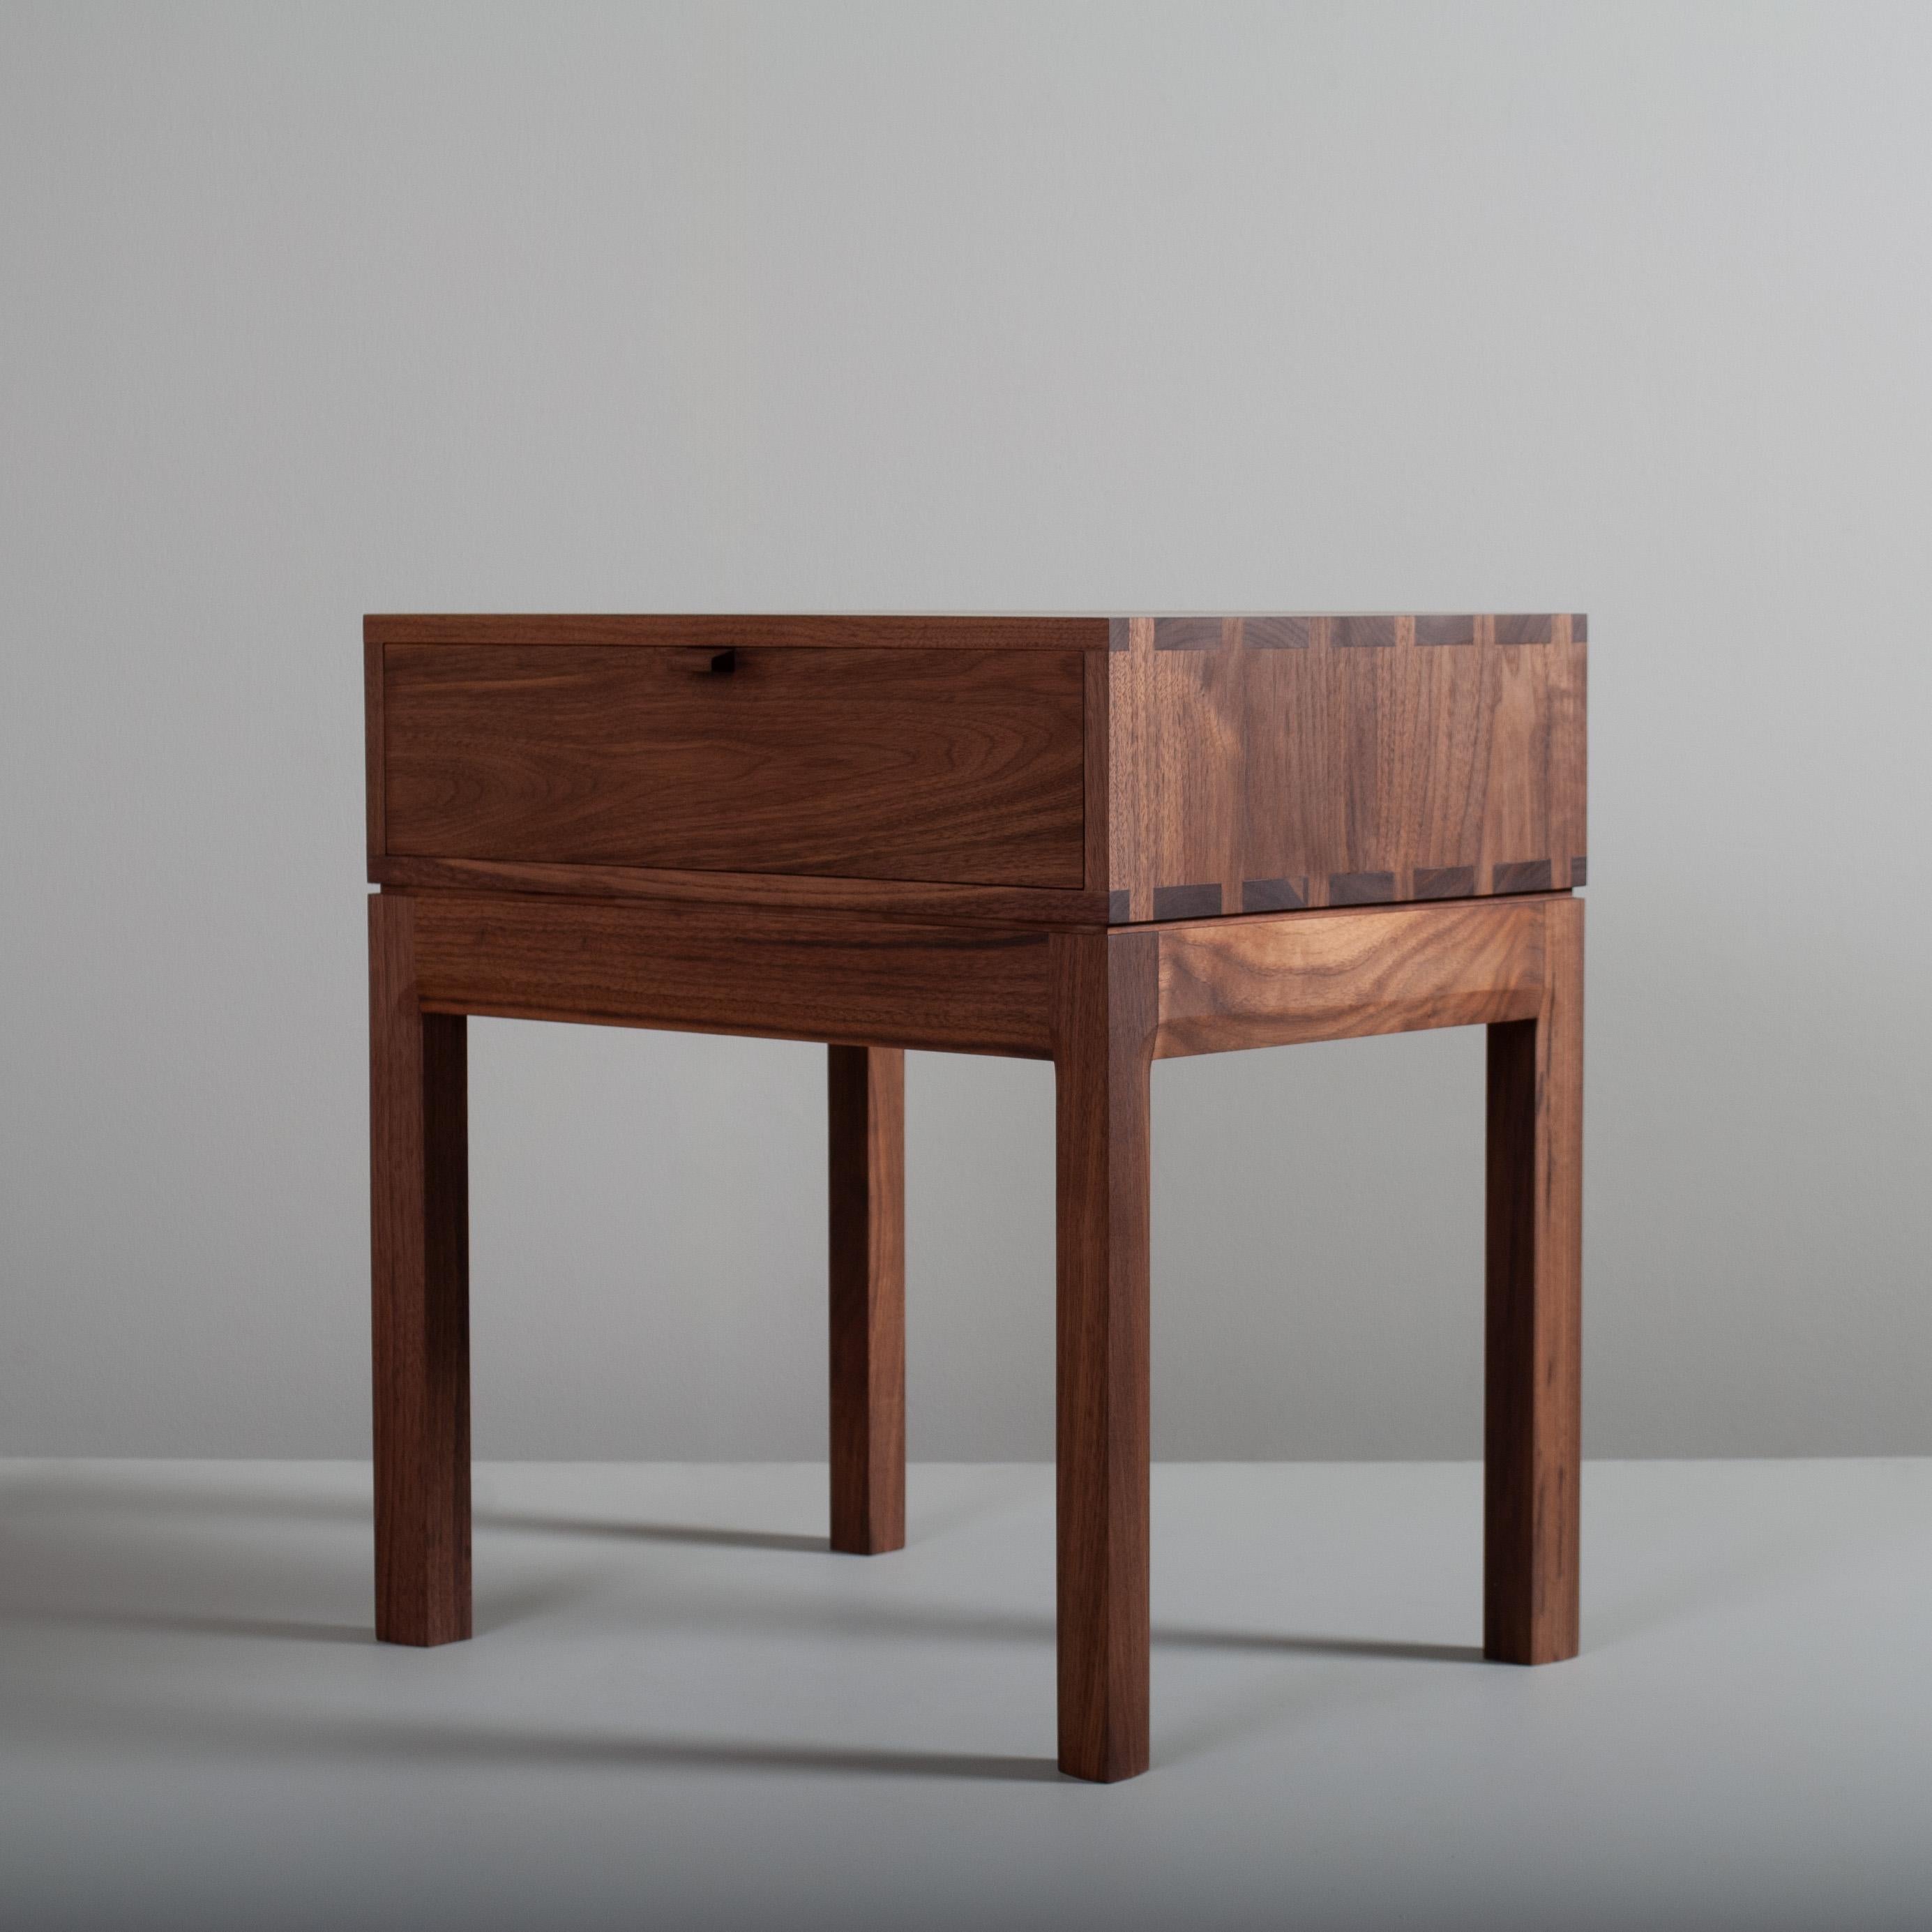 American black walnut hand-crafted end tables in a modernist design. These are constructed from the finest American black walnut with the inner dovetailed traditionally jointed drawer carcass in prime English Oak. The main upper box is detailed with